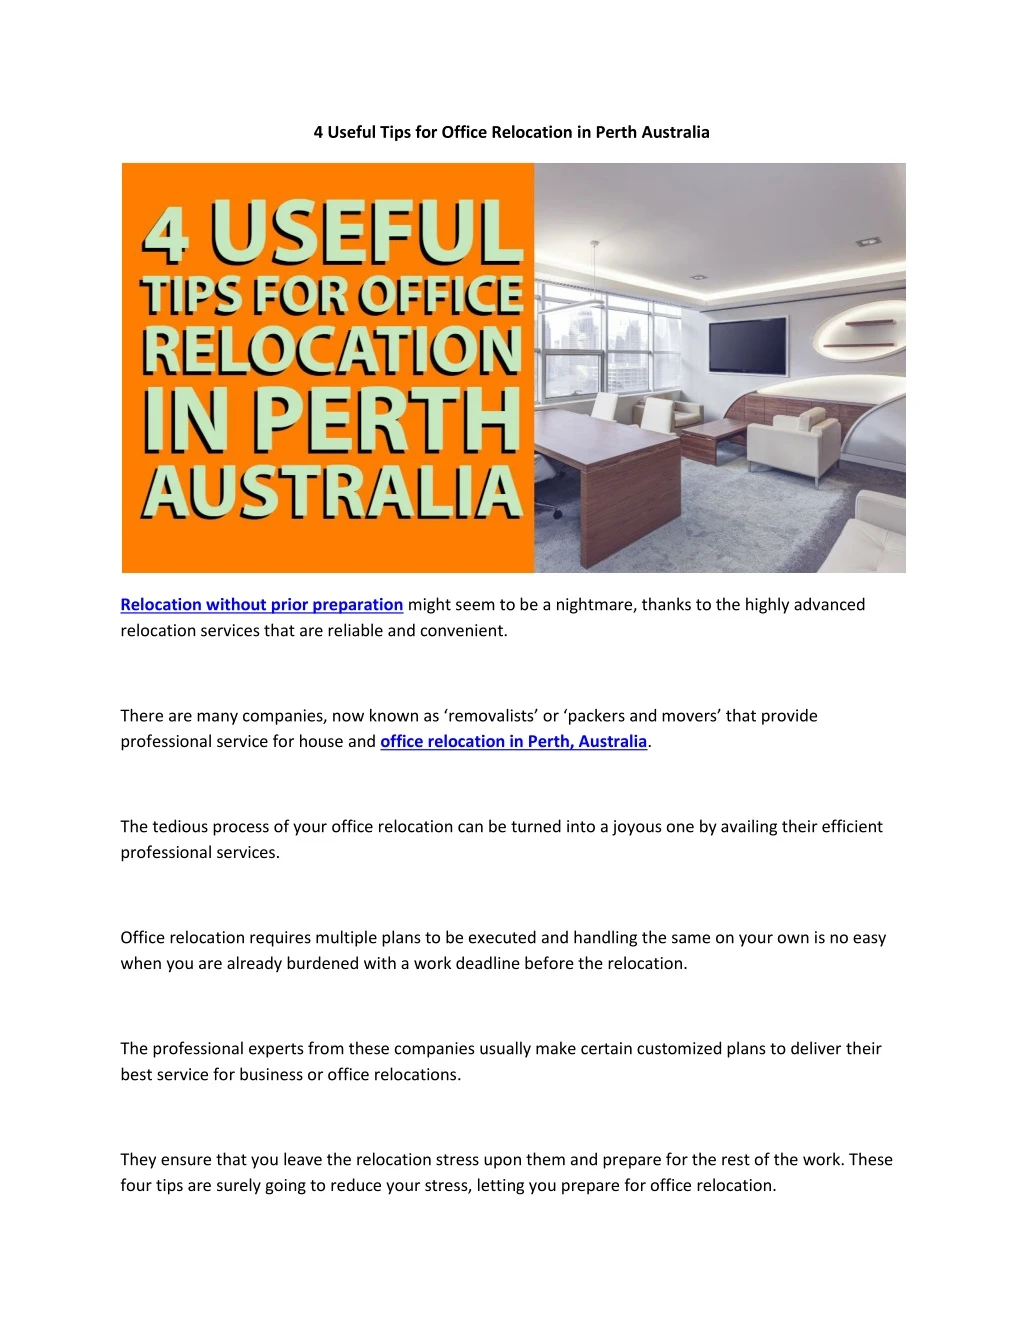 4 useful tips for office relocation in perth